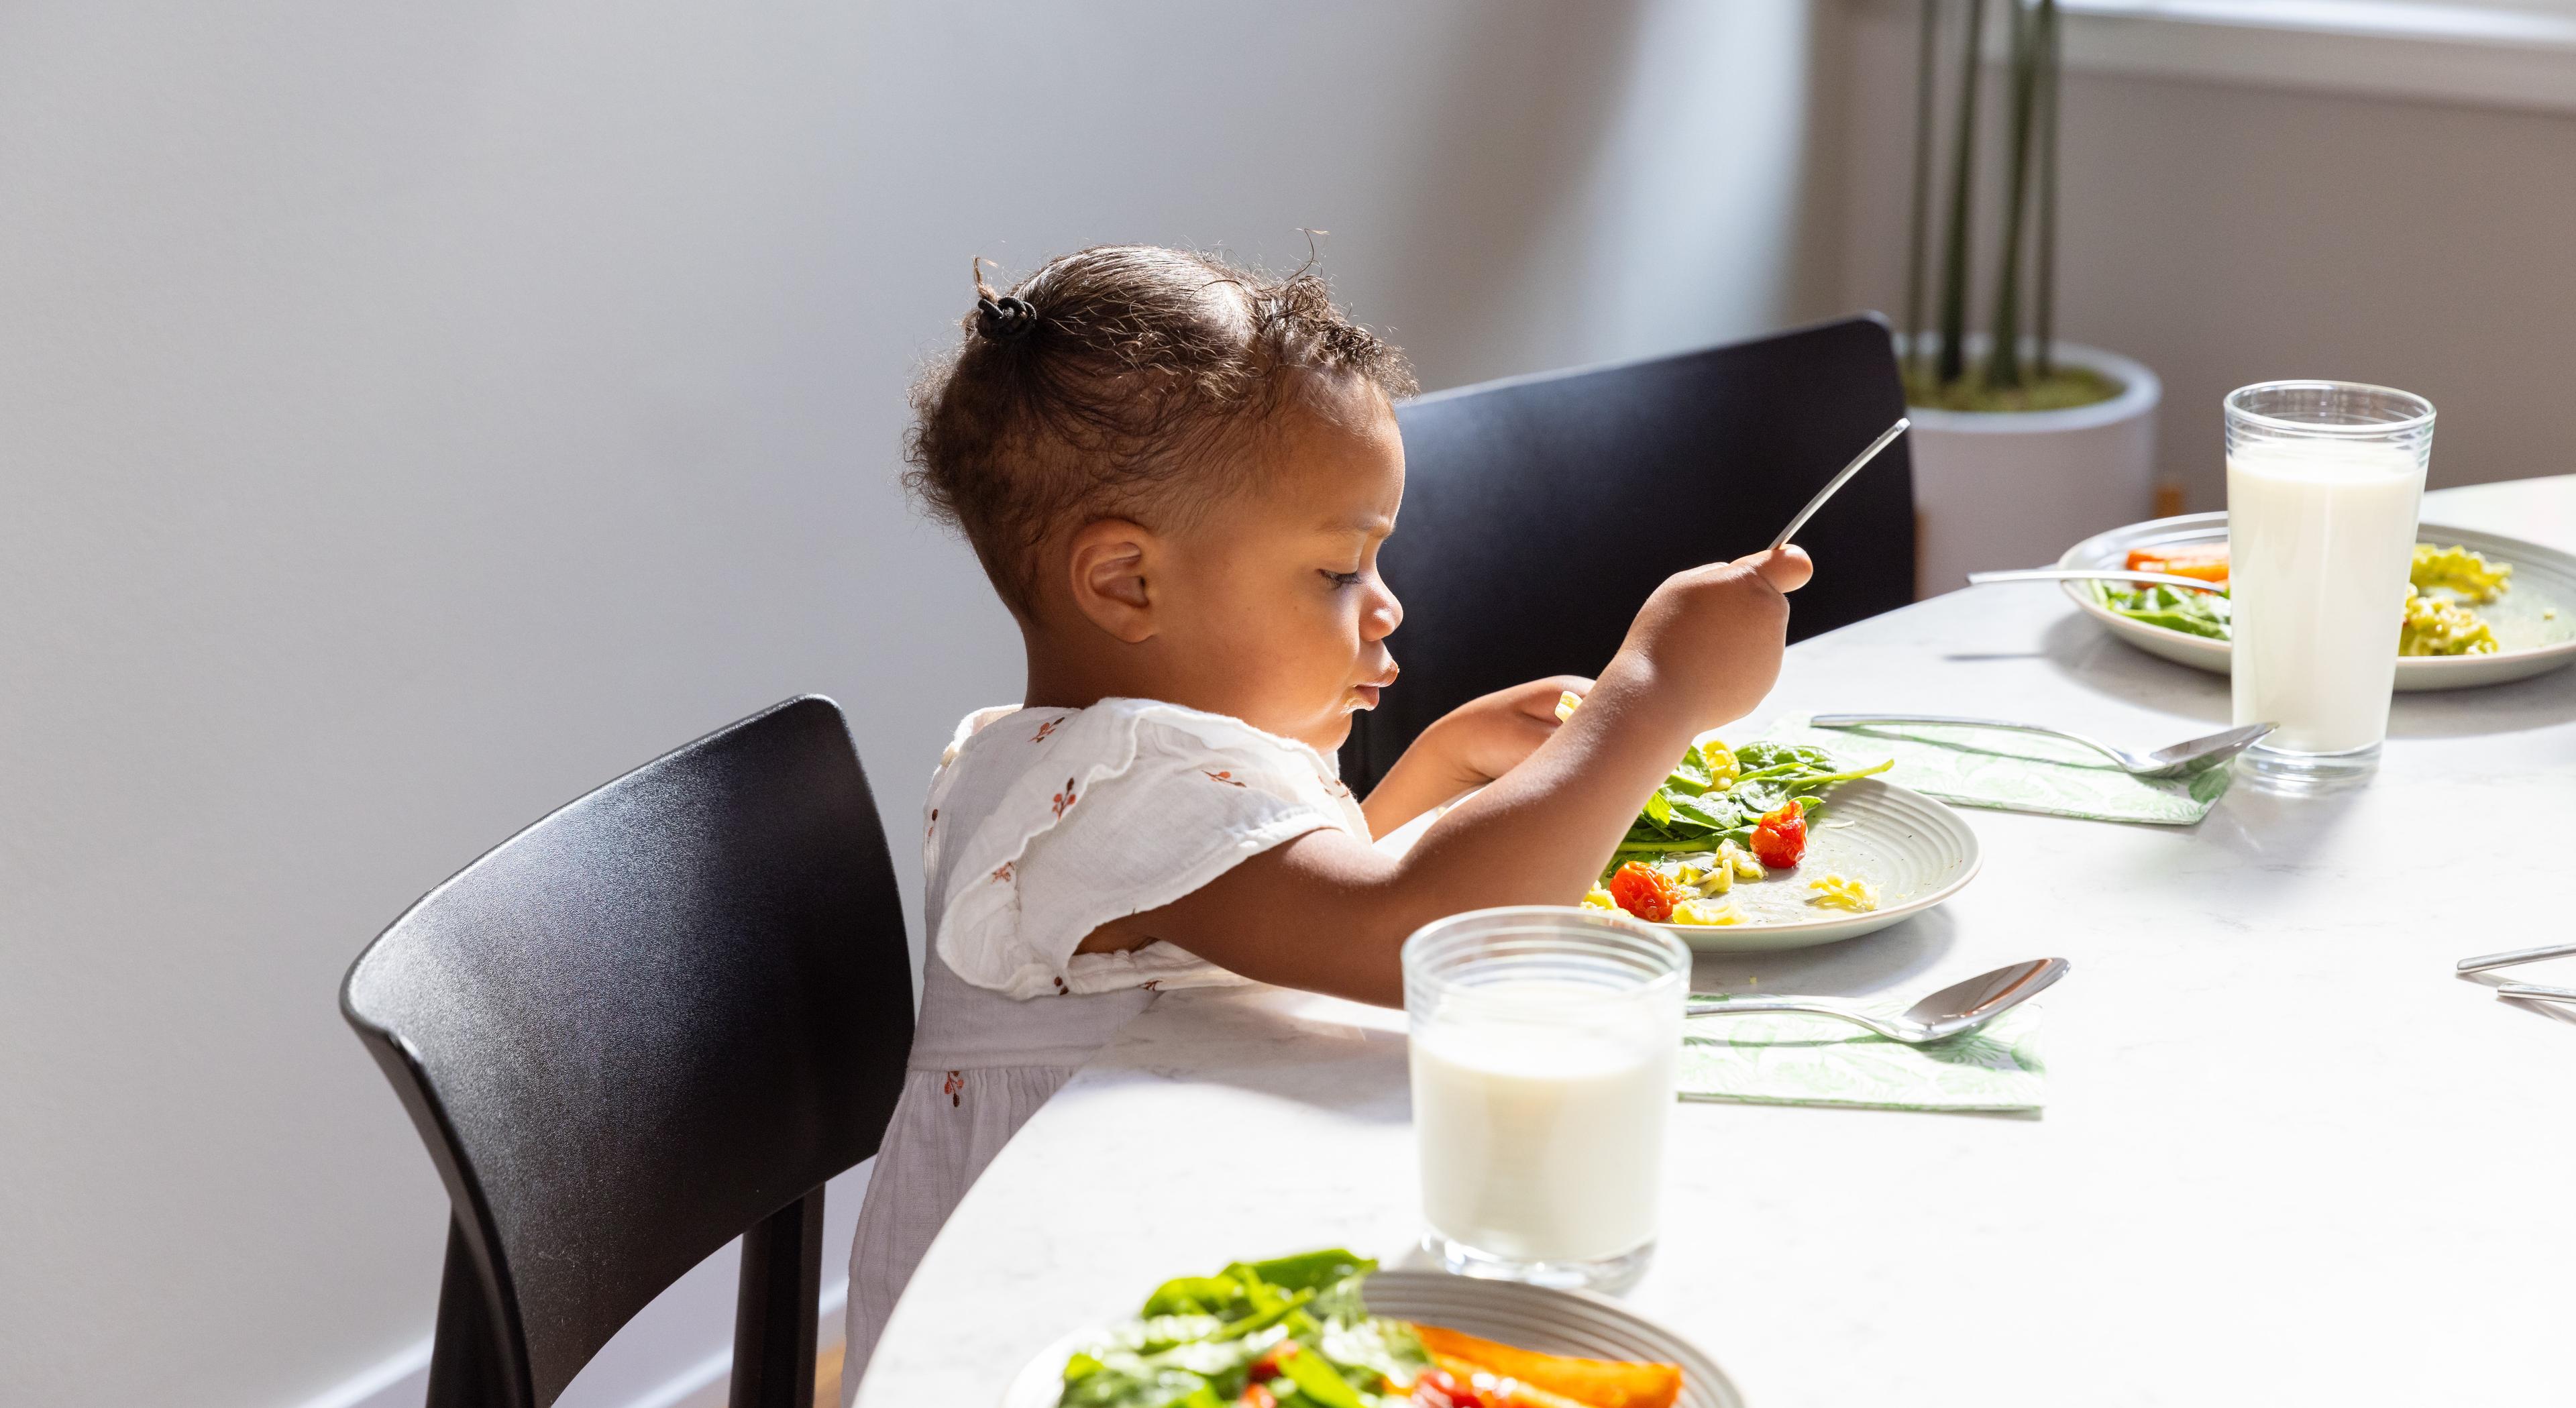 Milk is on the table as a toddler eats.